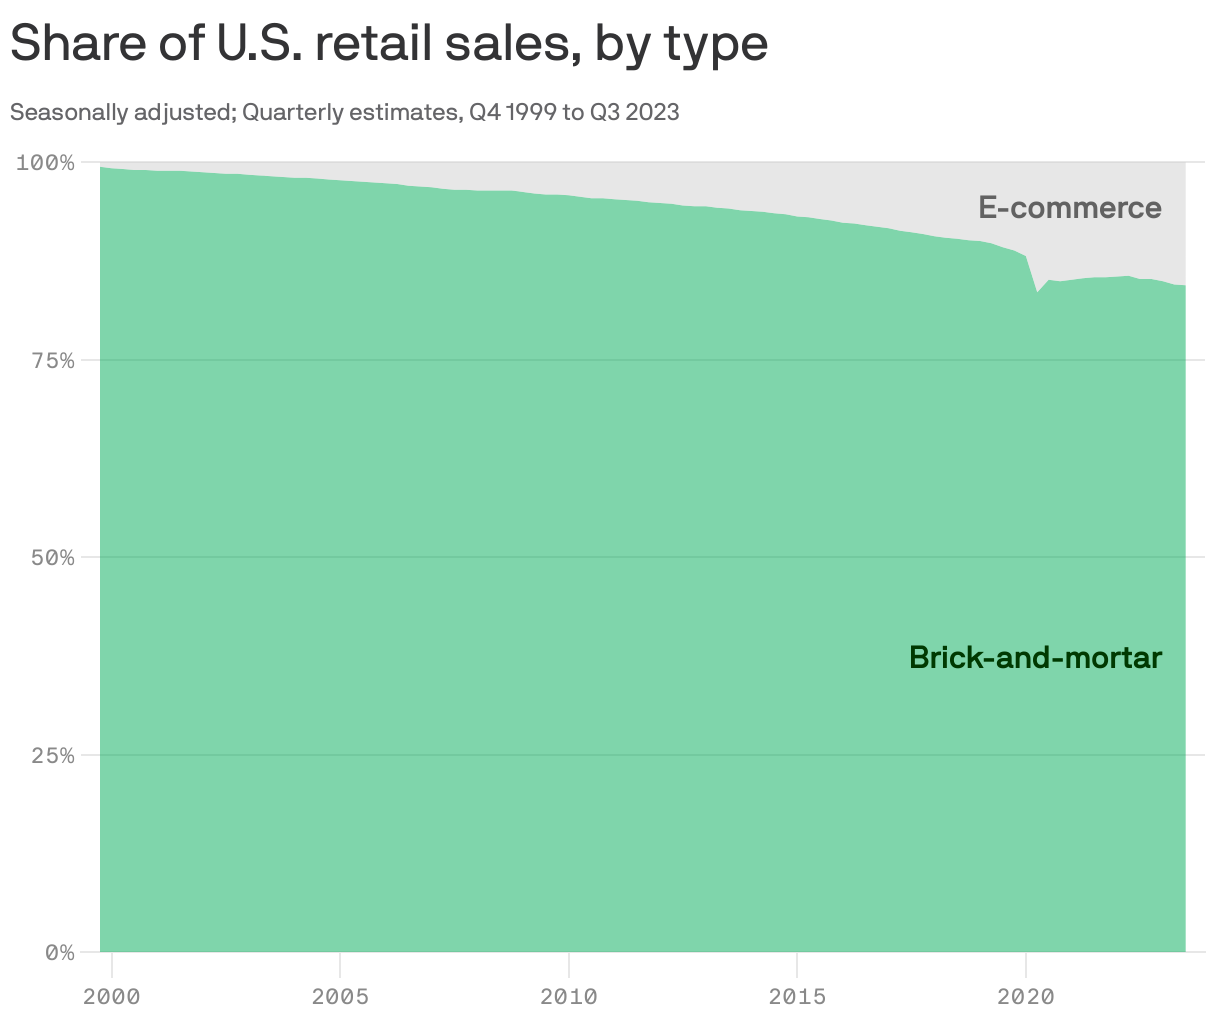 Share of U.S. retail sales, by type